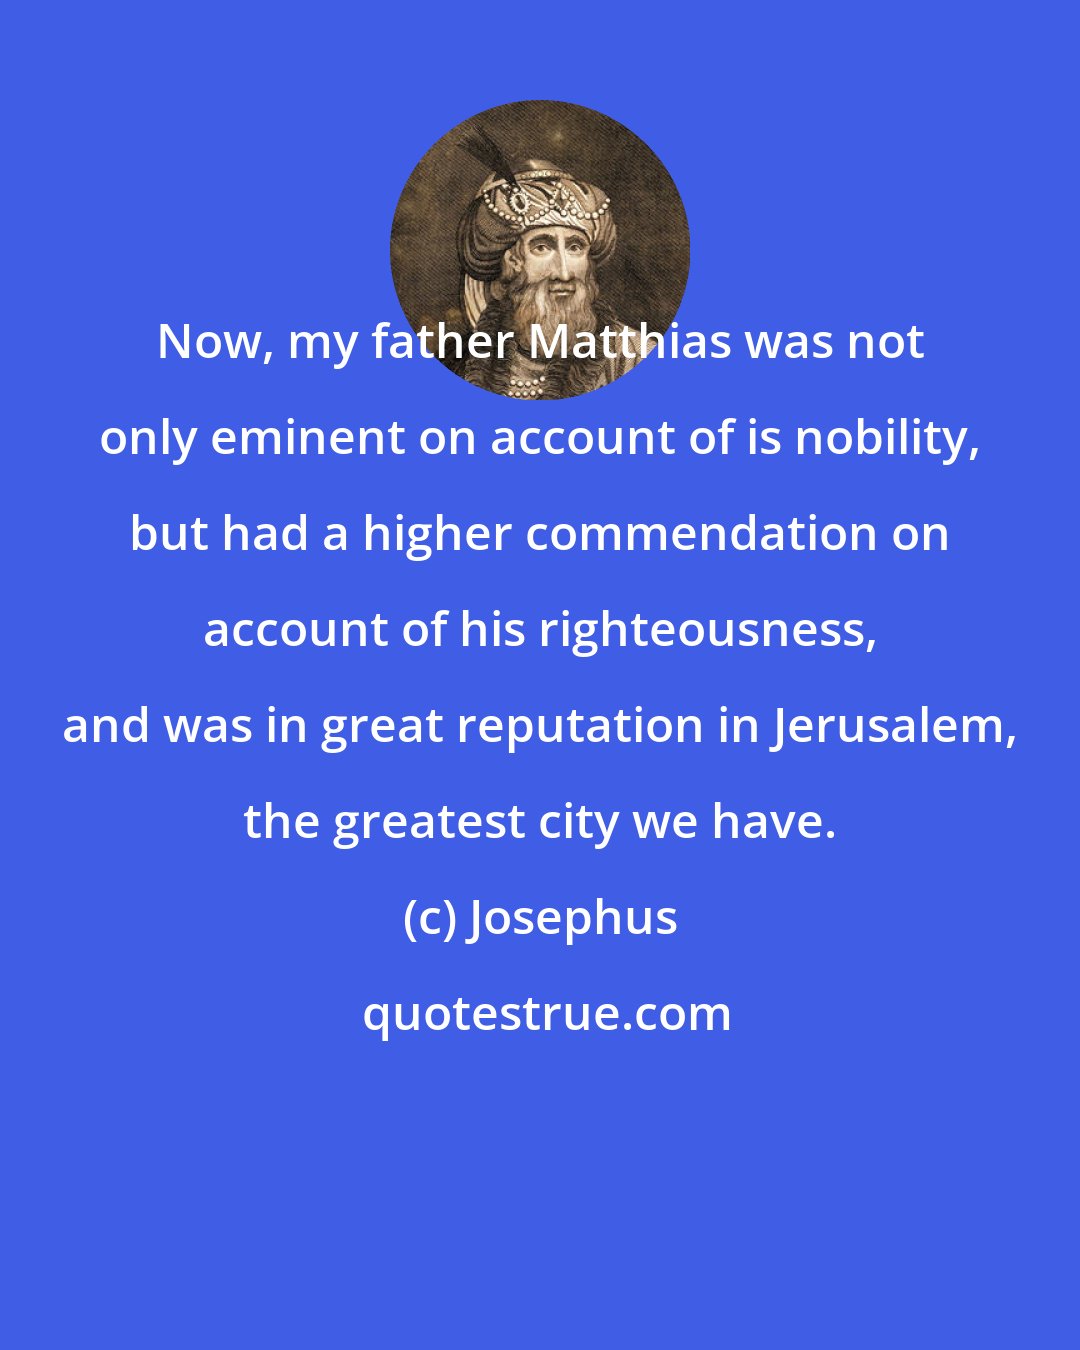 Josephus: Now, my father Matthias was not only eminent on account of is nobility, but had a higher commendation on account of his righteousness, and was in great reputation in Jerusalem, the greatest city we have.